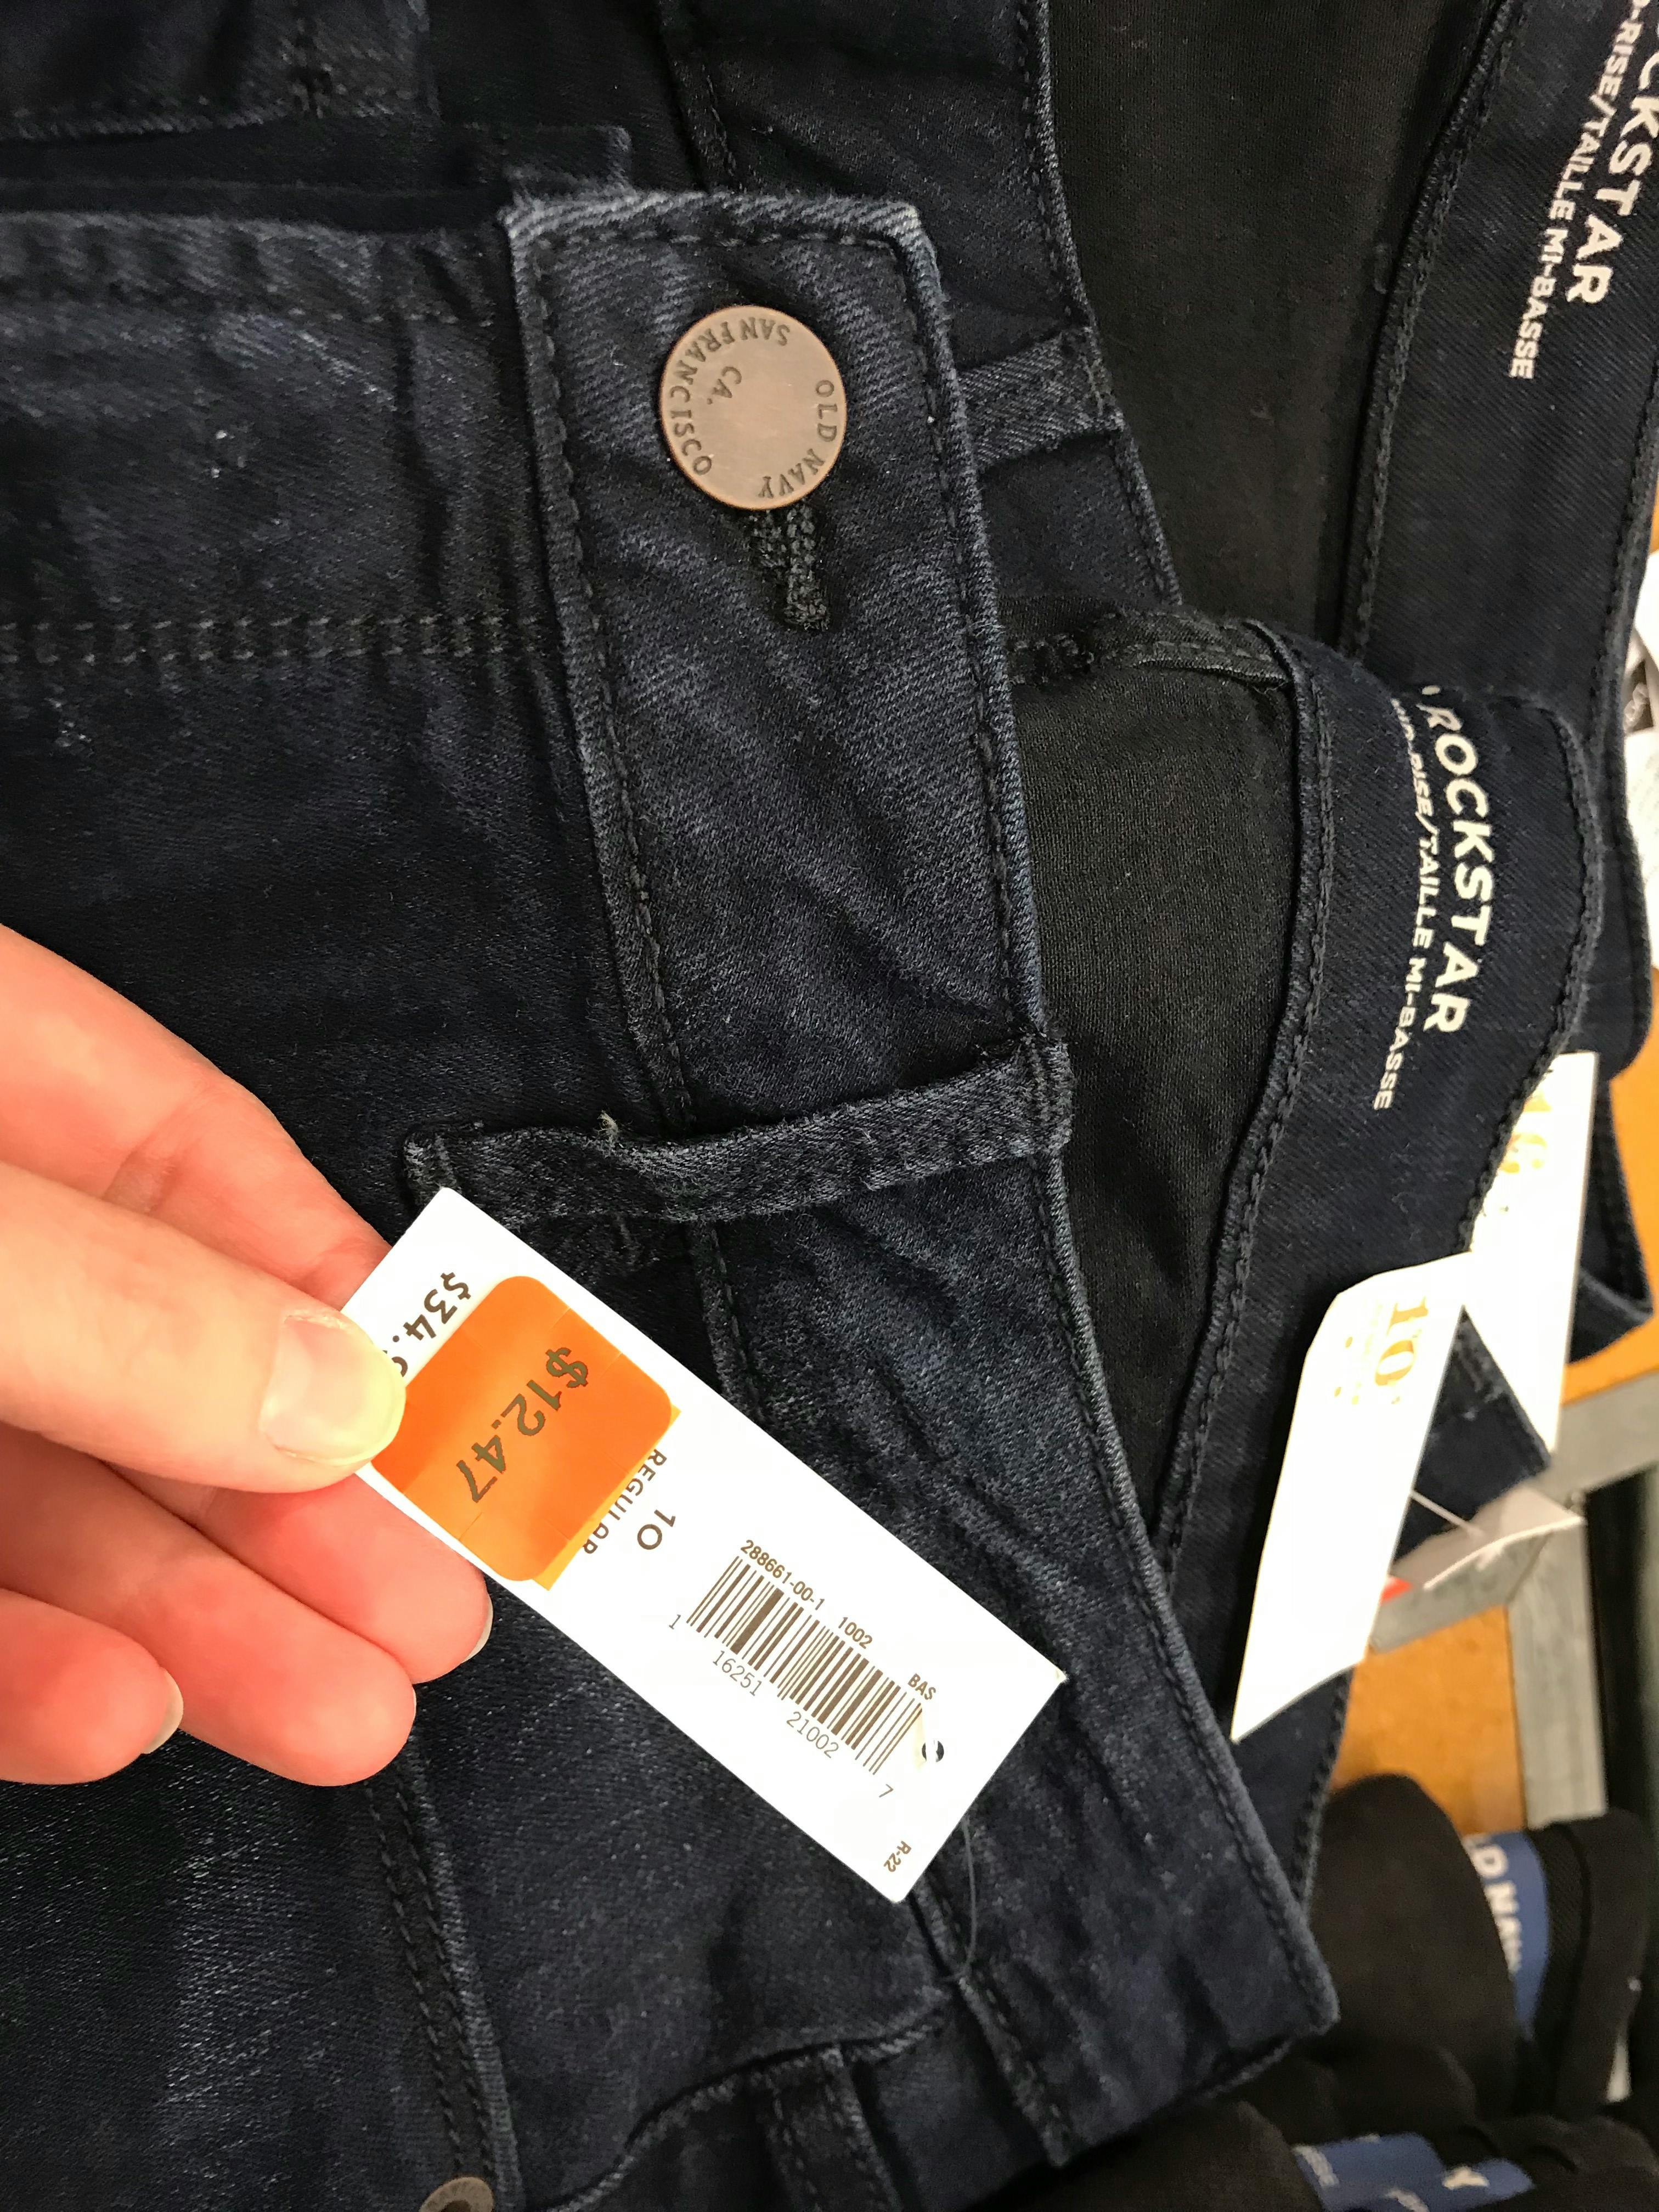 lucky jeans black friday 2018